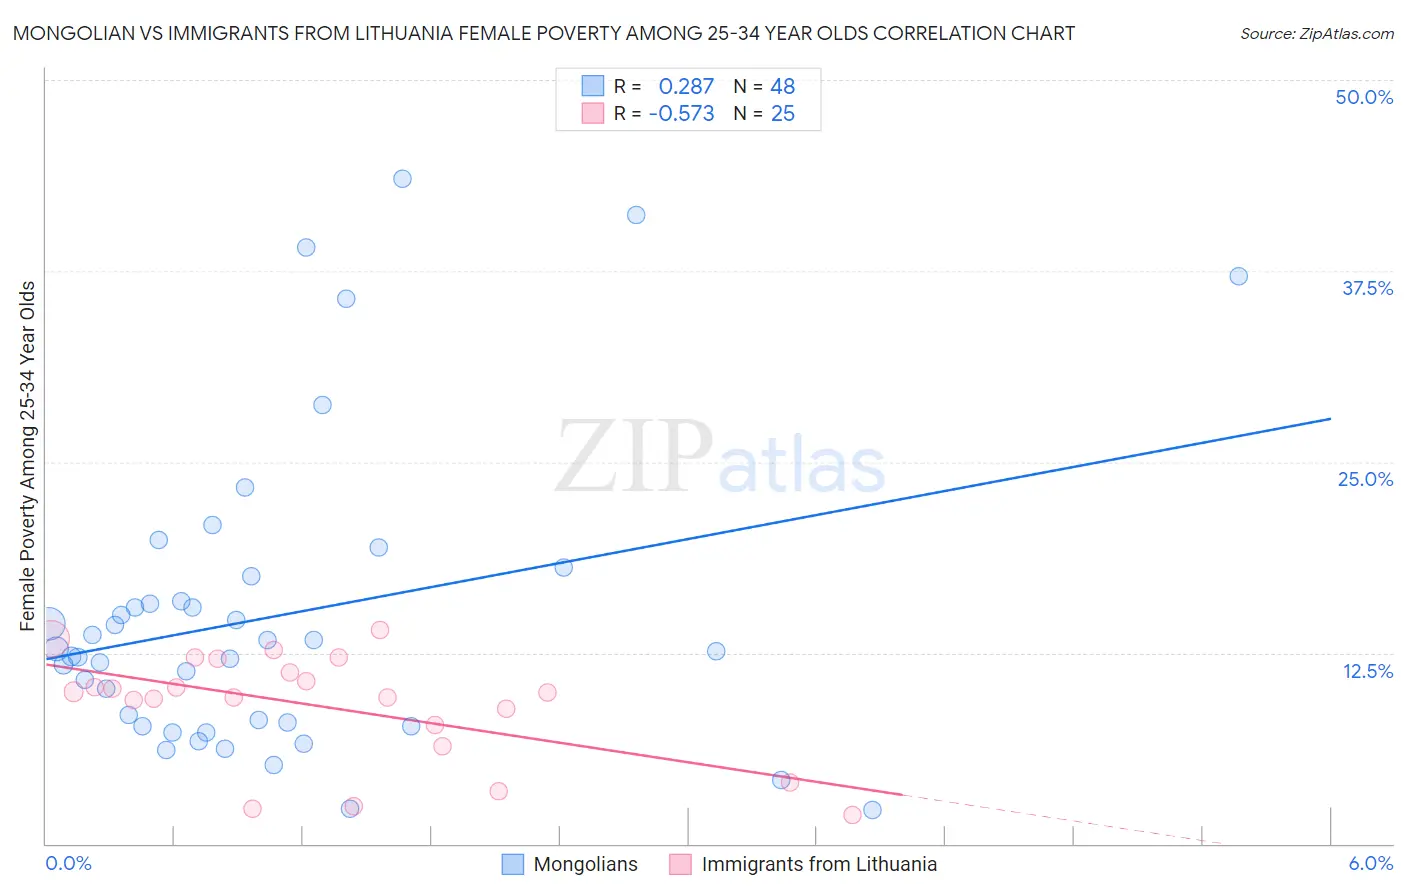 Mongolian vs Immigrants from Lithuania Female Poverty Among 25-34 Year Olds